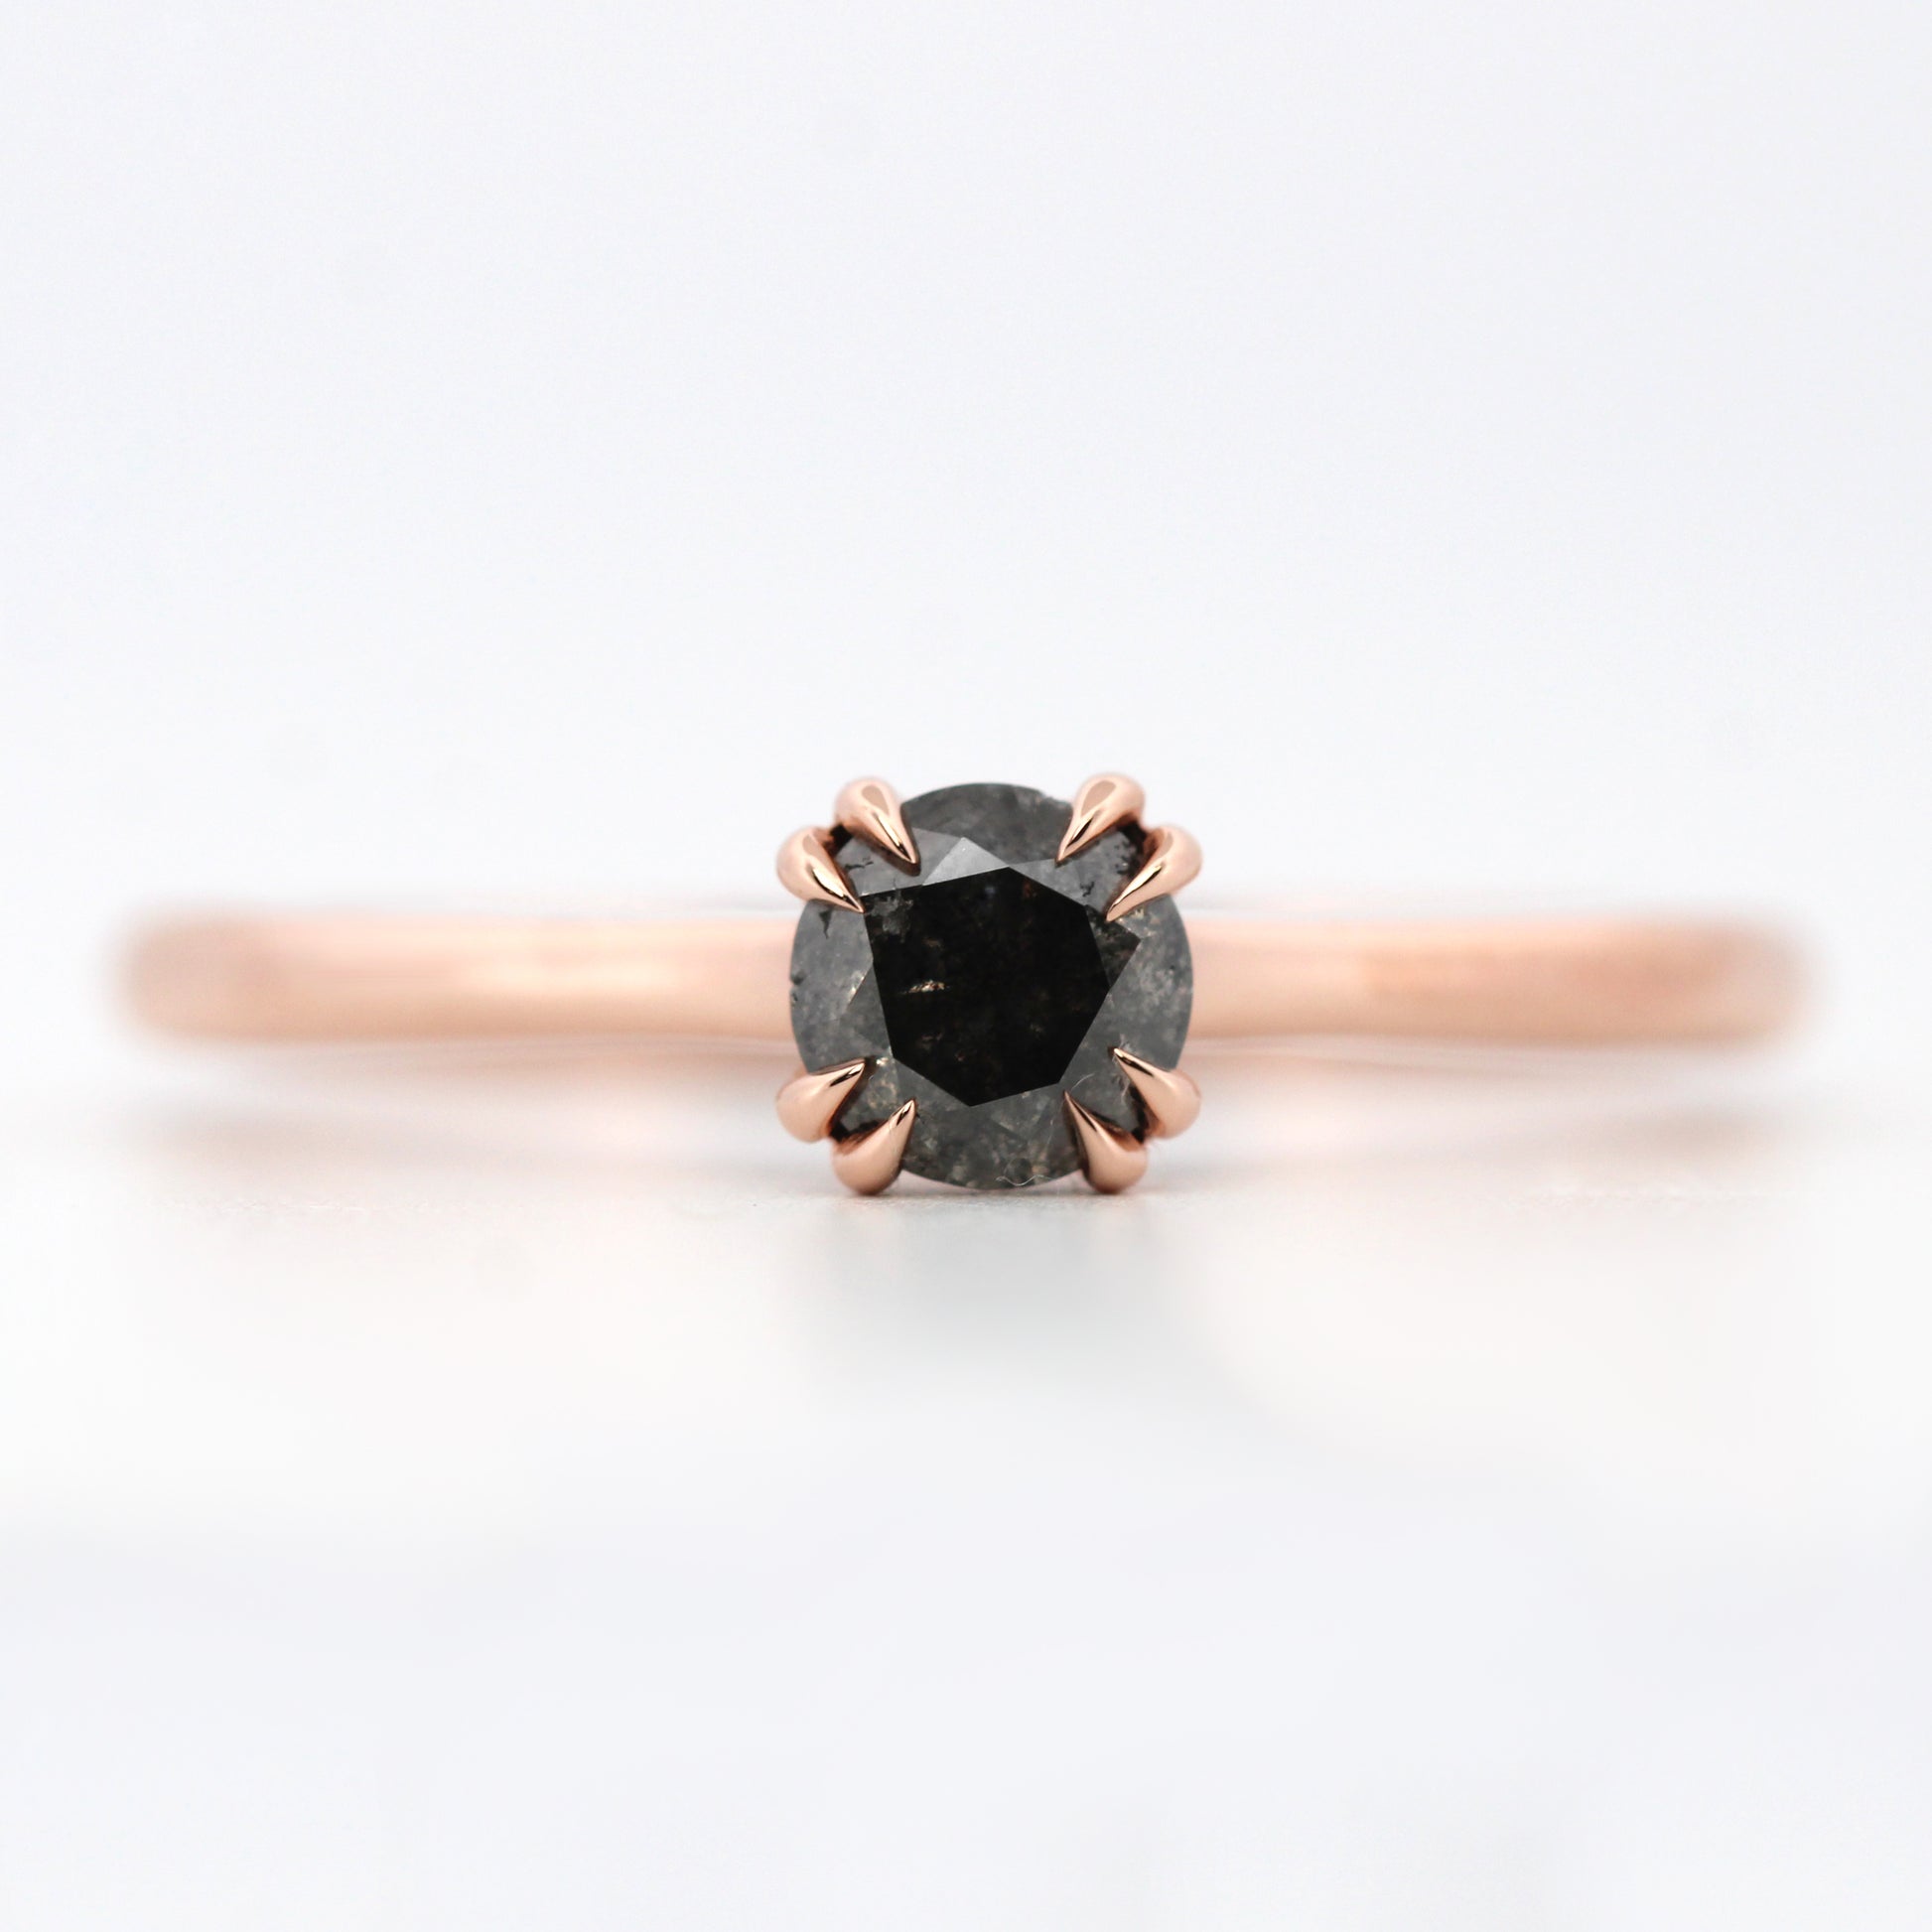 Nesta Ring with a 0.45 Carat Round Black Celestial Diamond in 14k Rose Gold - Ready to Size and Ship - Midwinter Co. Alternative Bridal Rings and Modern Fine Jewelry